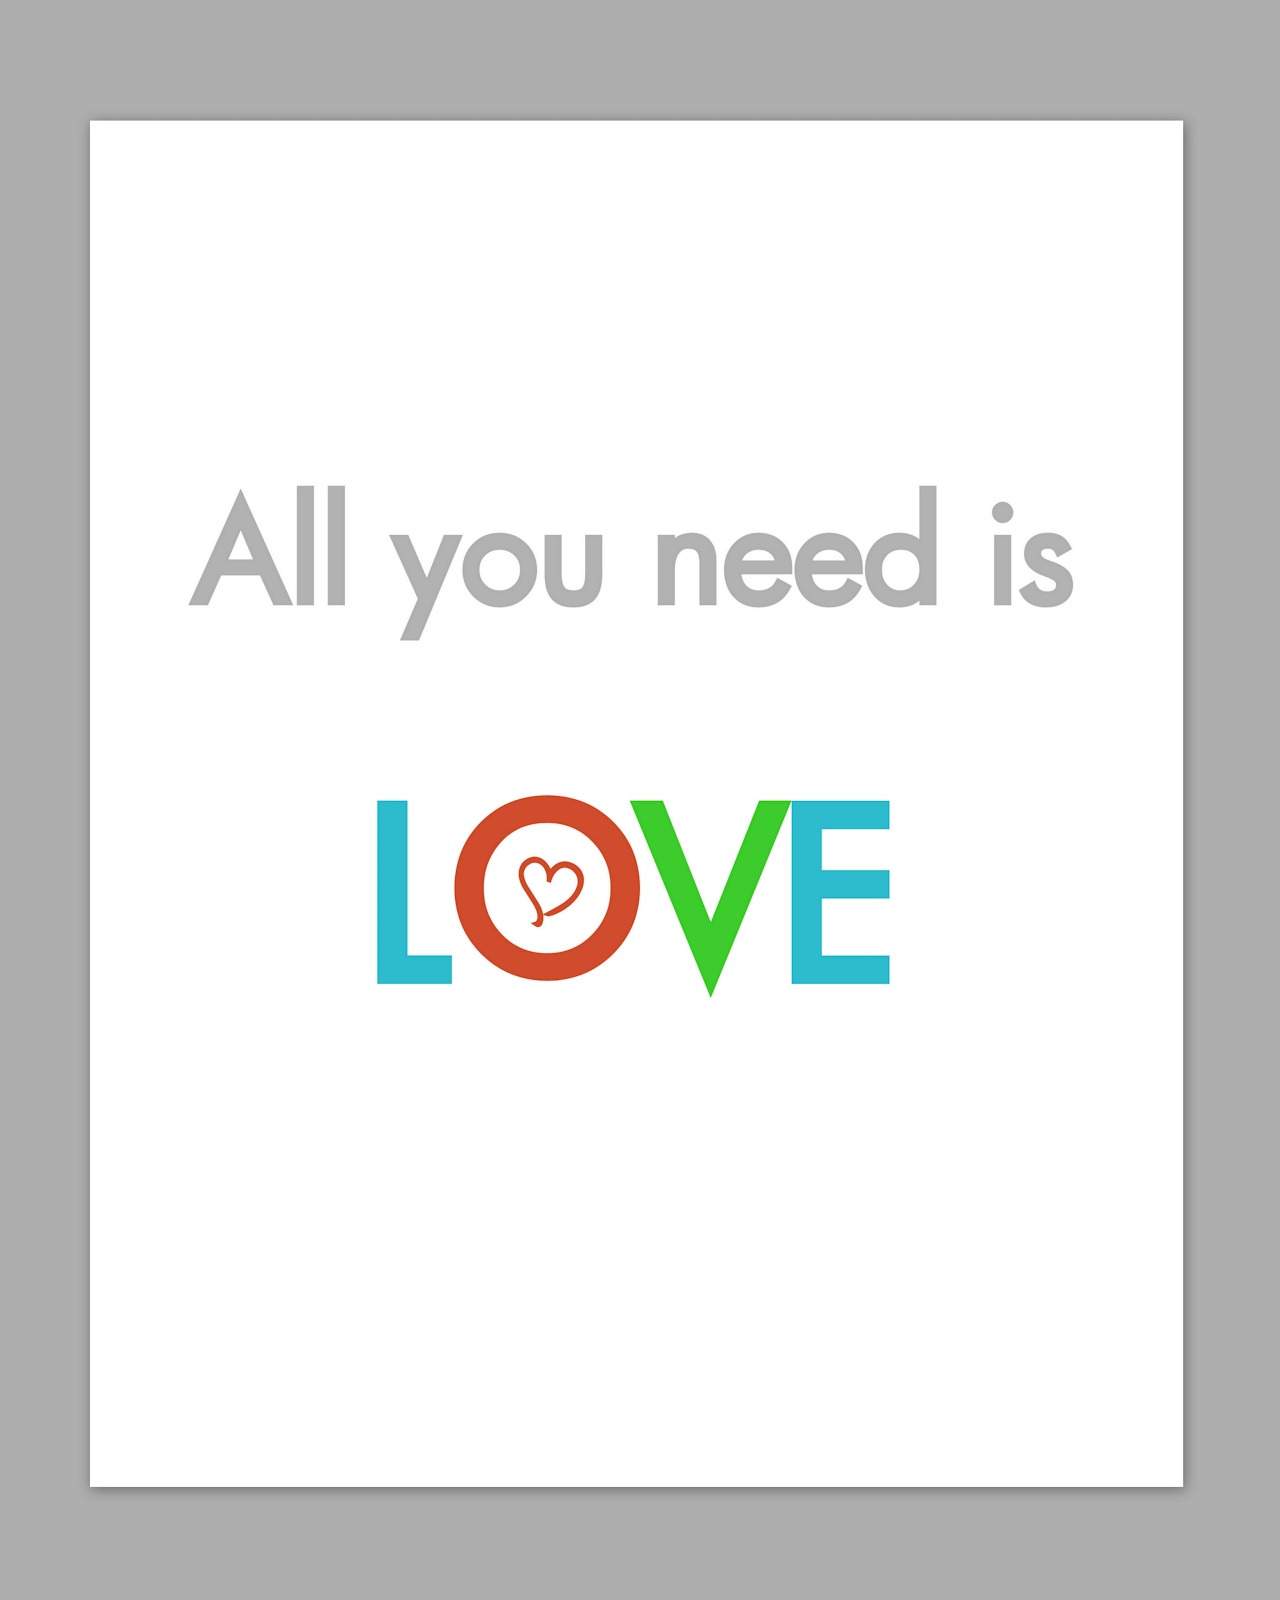 No time to be bored: All you need is love - free printable